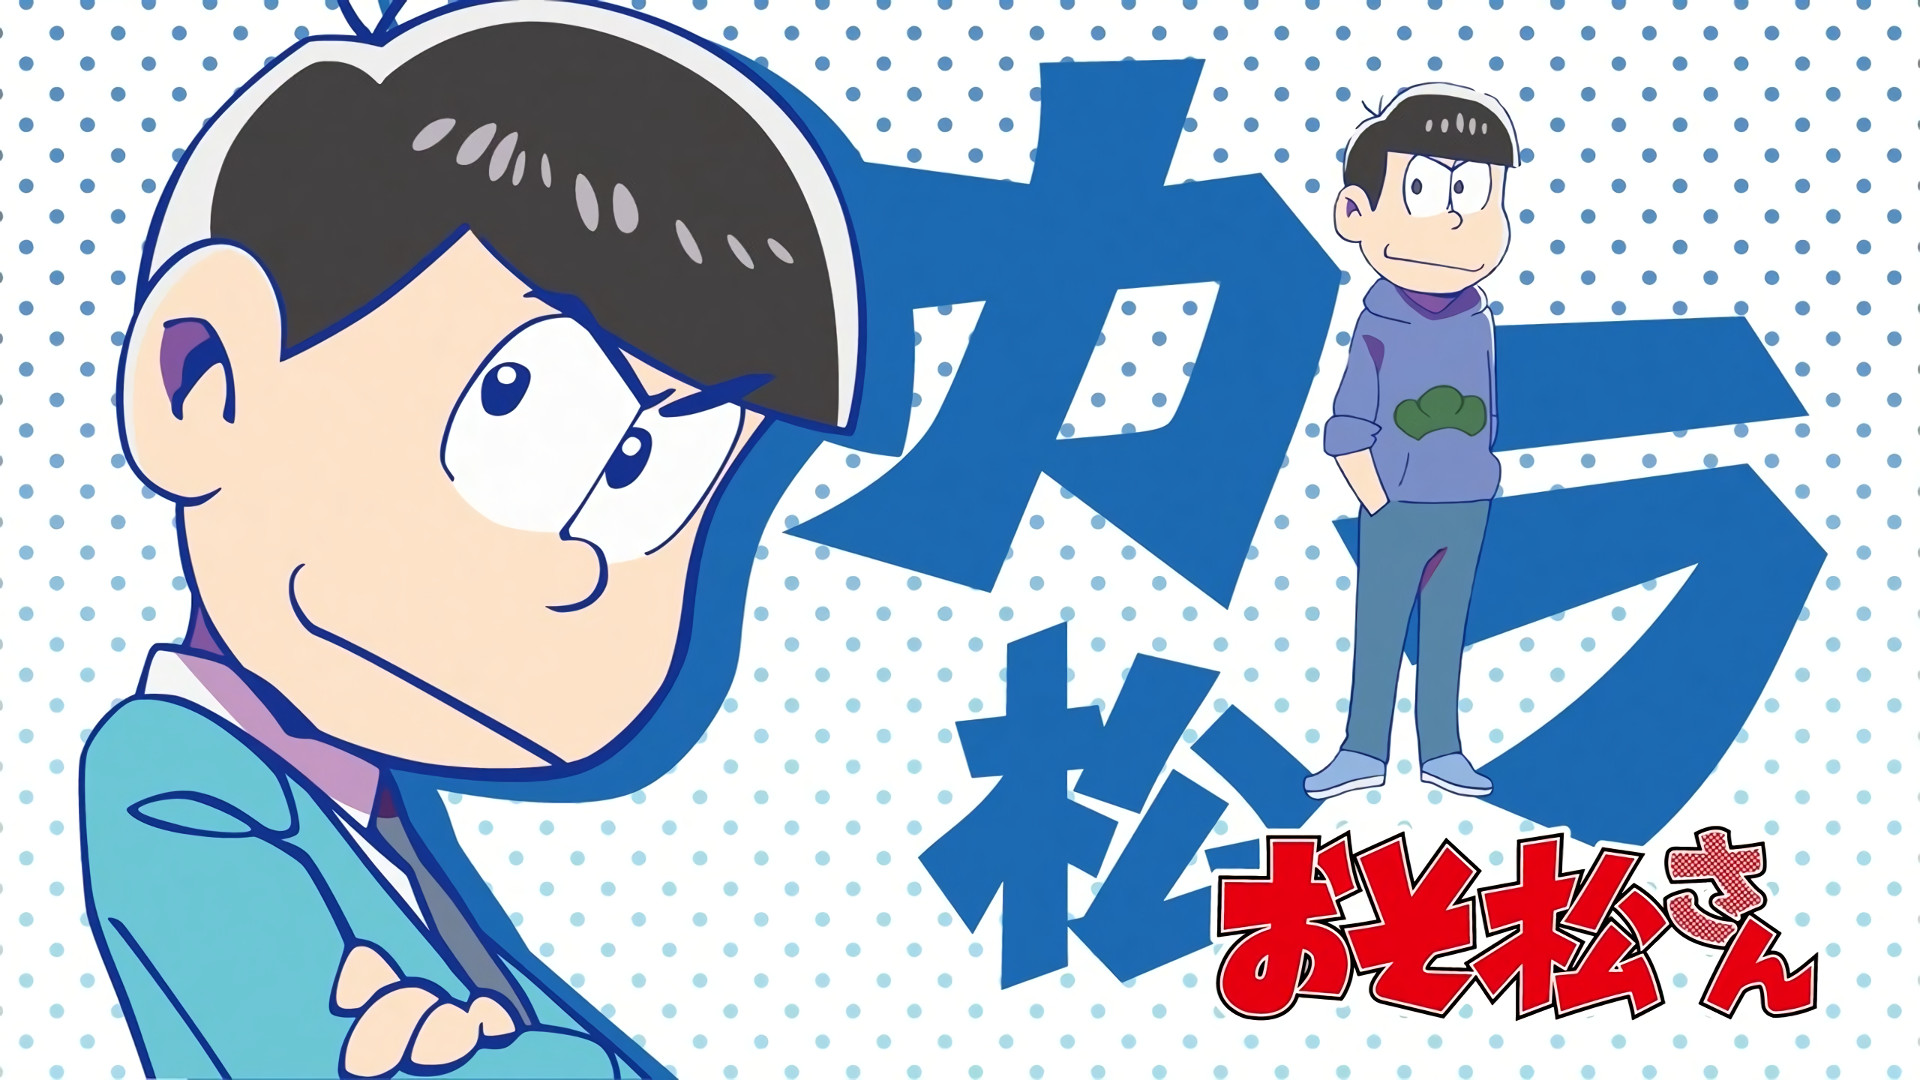 Karamatsu is known as the cool idiot. In my opinion, hes one of the easiest ones to distinguish. He always tries to act cool to impress people